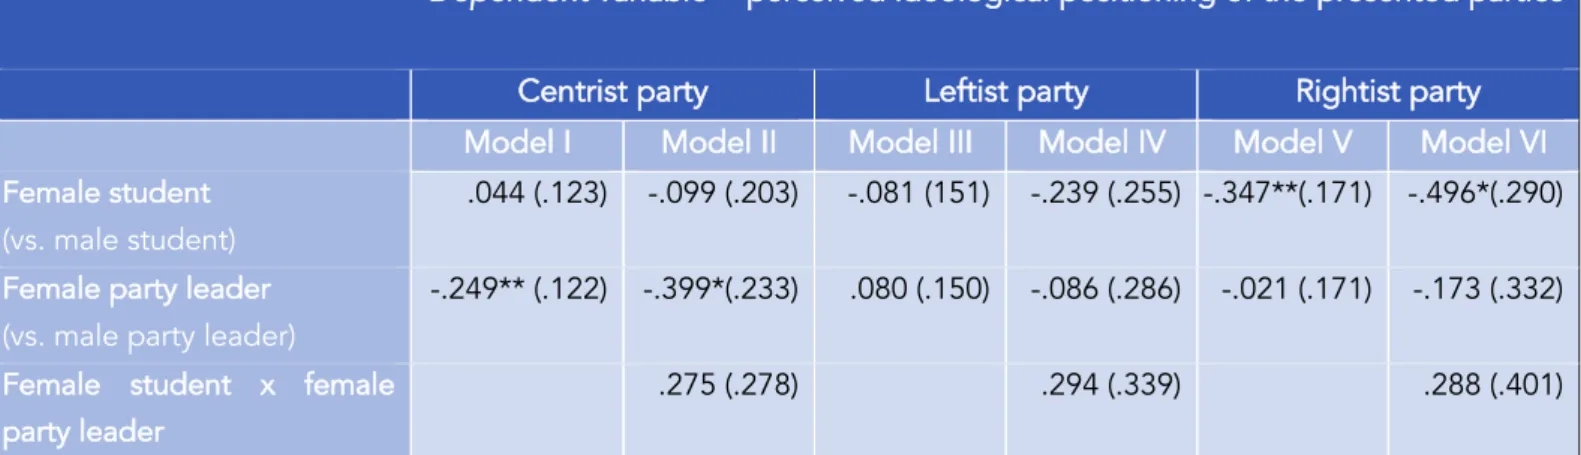 Table 2: Regression model predicting the perceived ideological positioning of centrist, leftist, and rightist parties based on students’ 